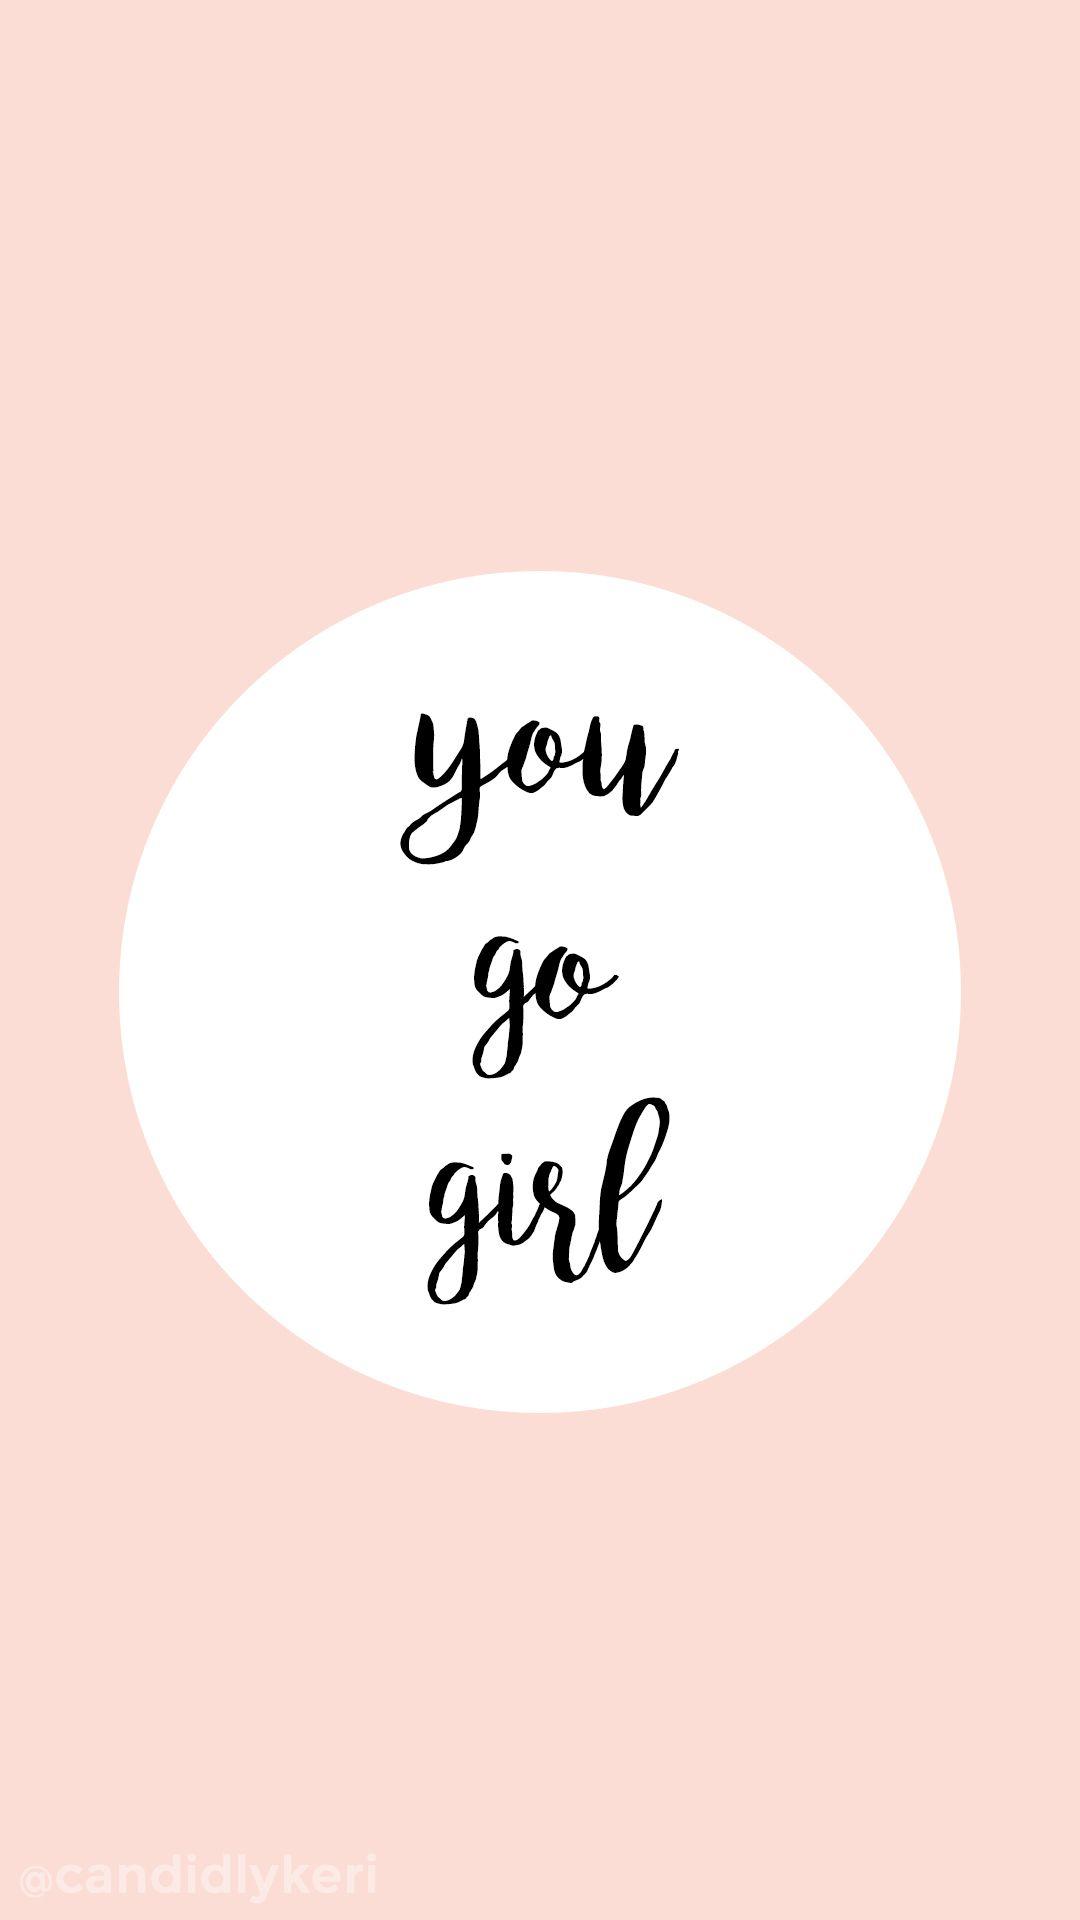 You Go Girl Pink quote inspirational background wallpaper you can